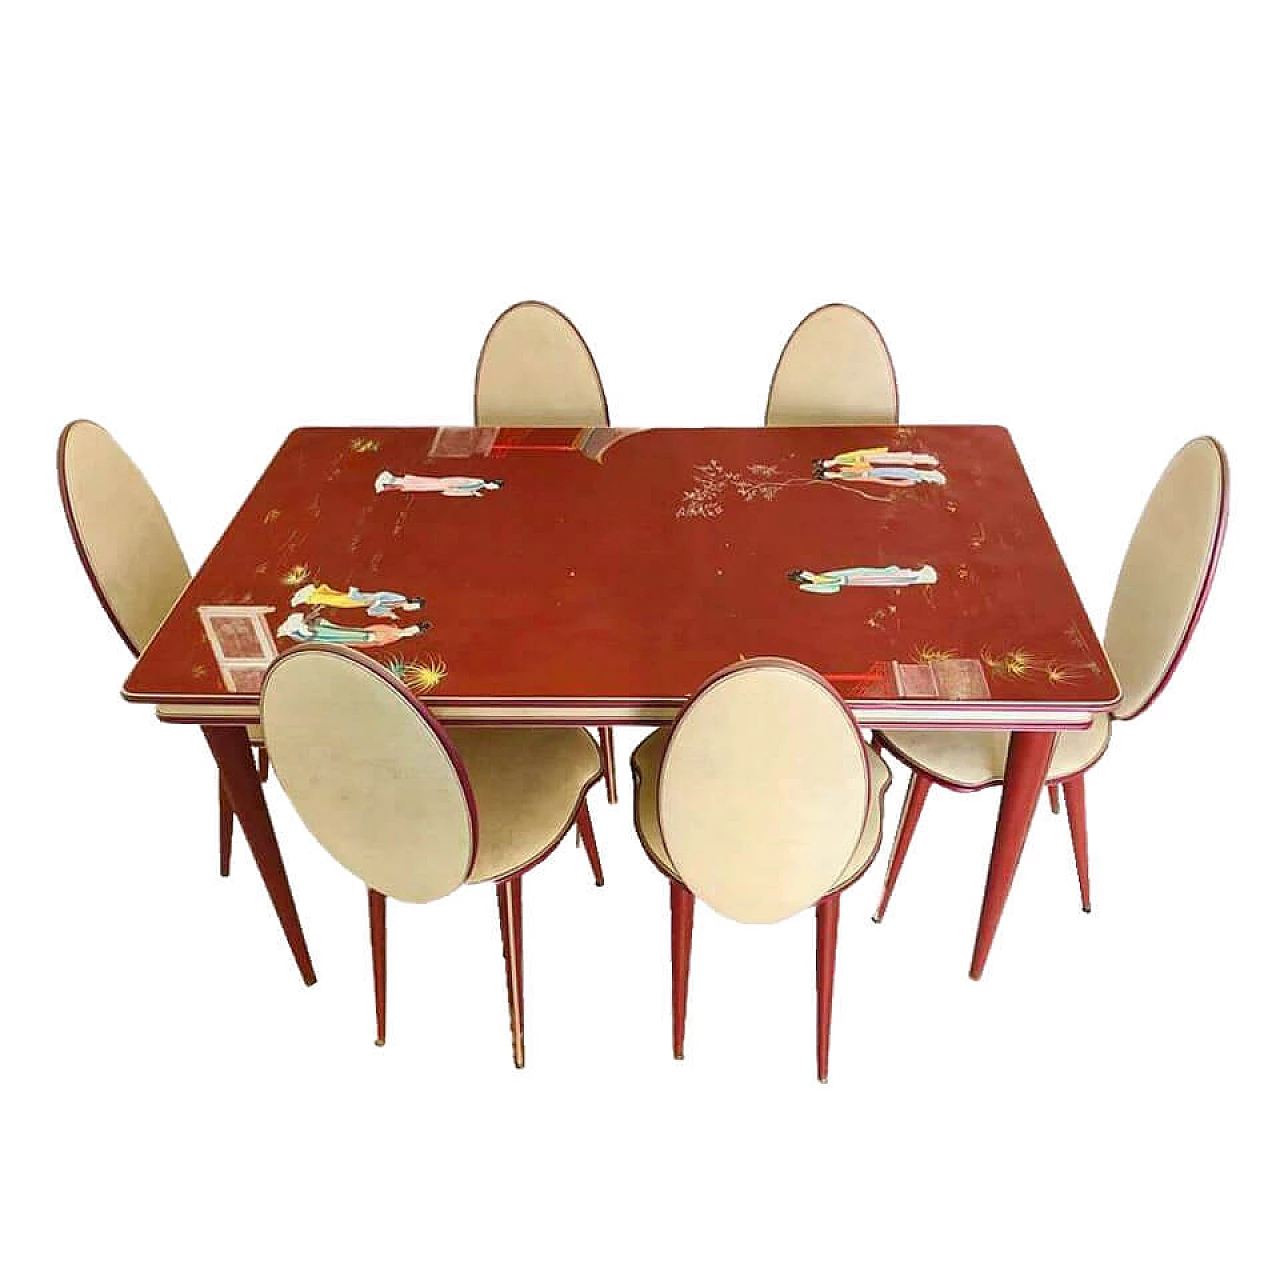 Dining table with chairs, Umberto Mascagni, 1950s 1066319